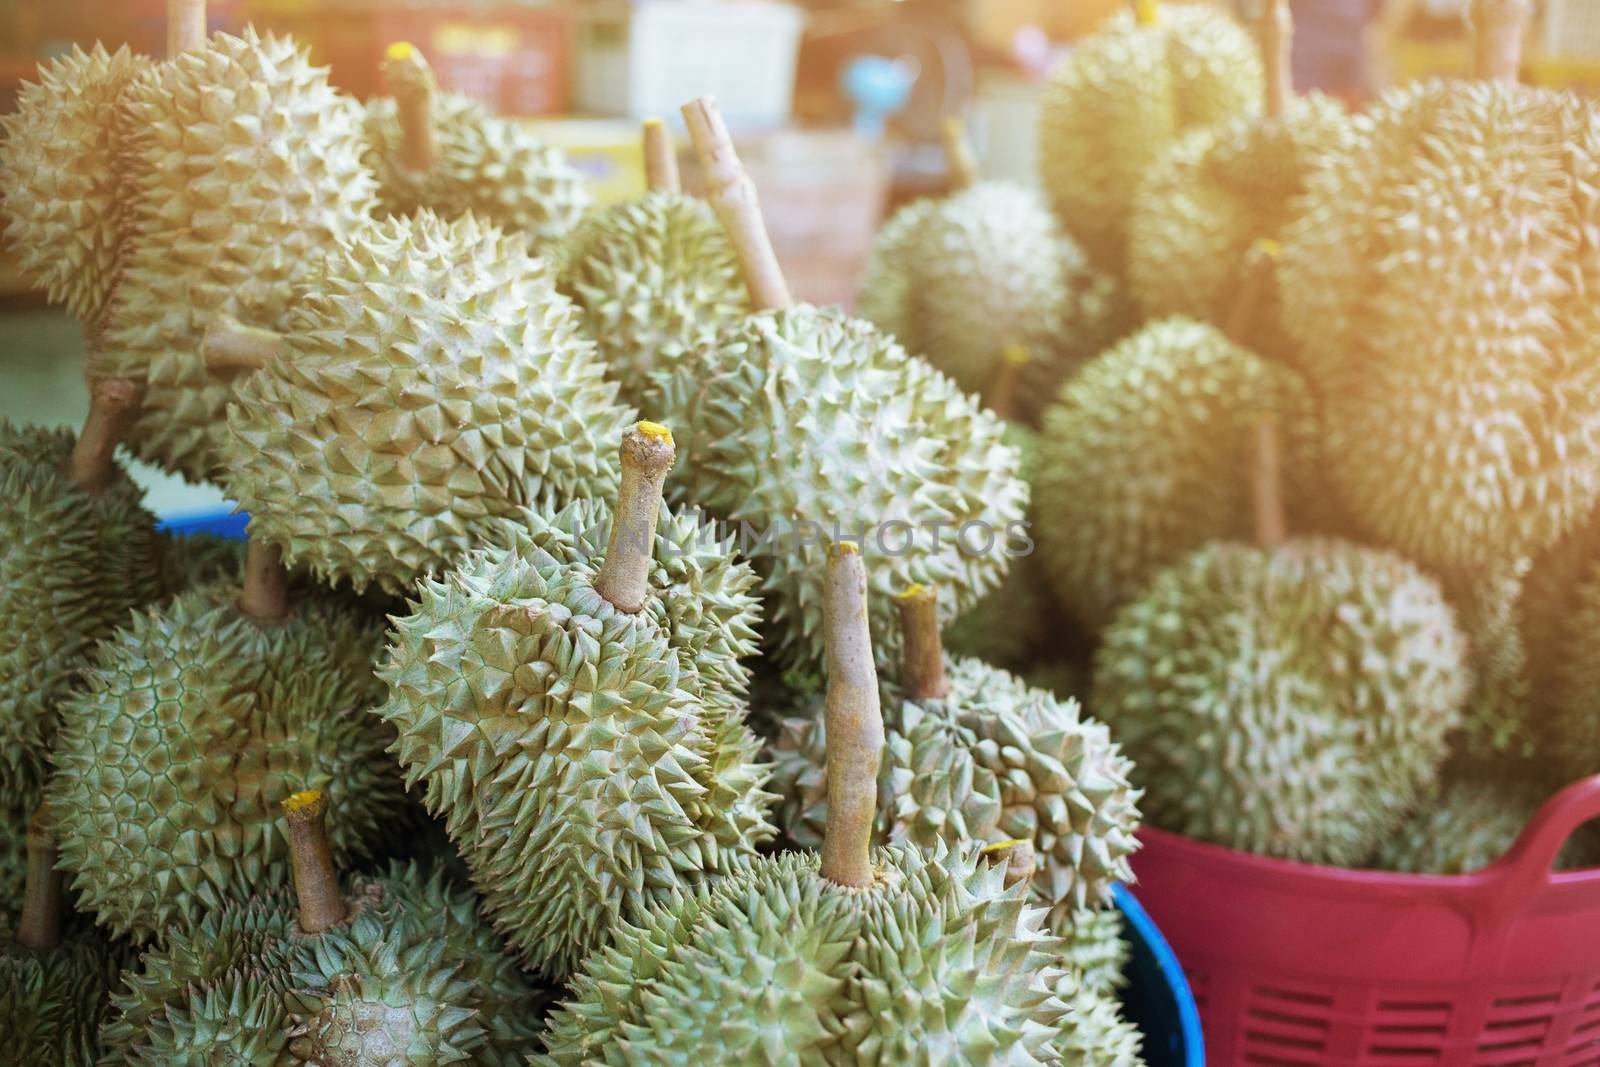 Durian is in the market